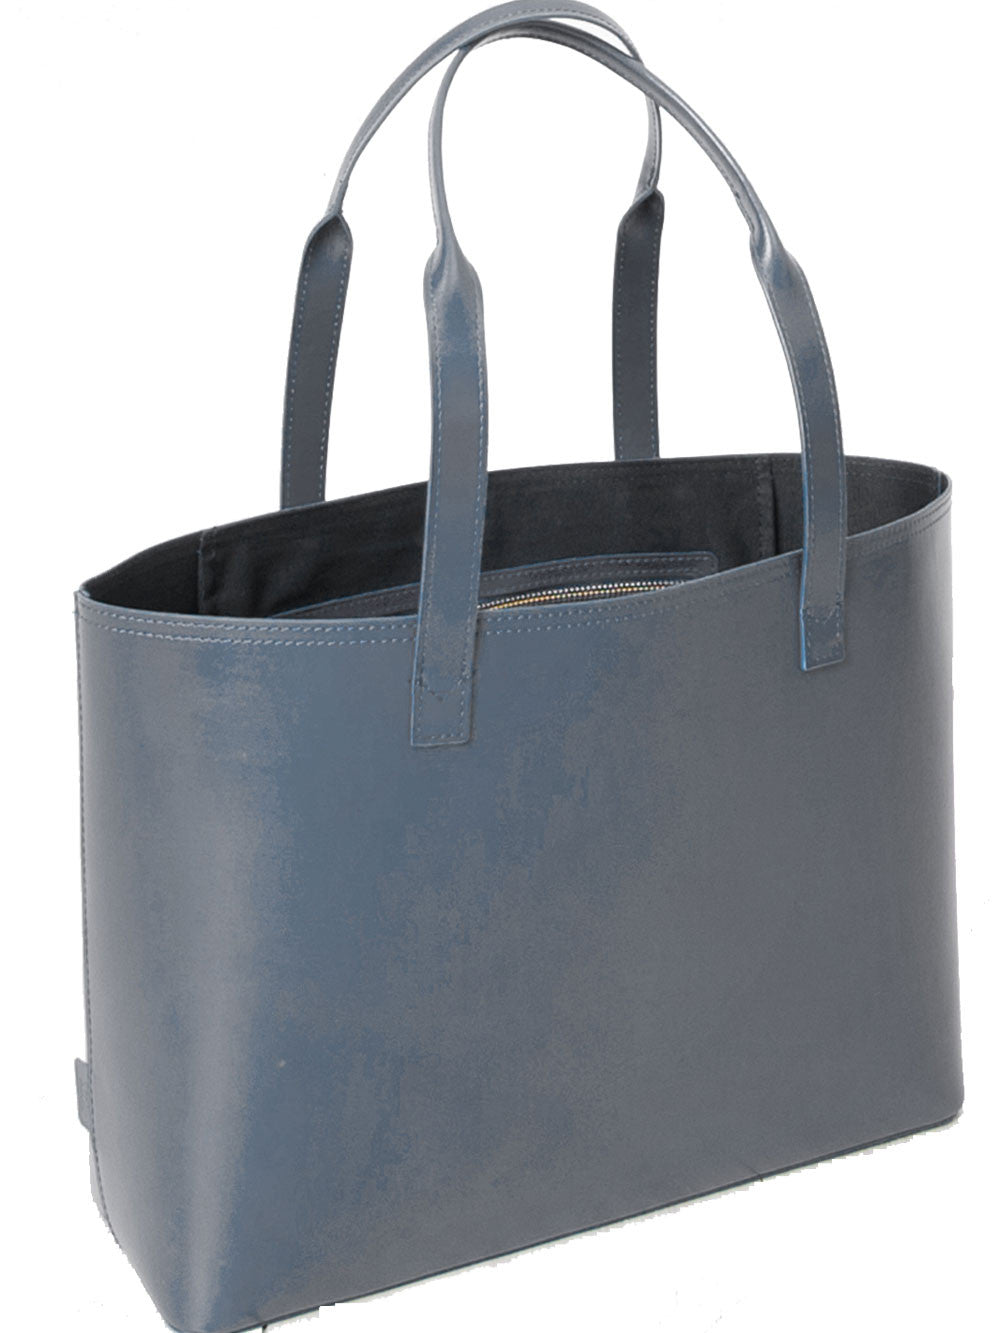 Paperthinks Recycled Leather Small Tote Bag Gray - Paperthinks.us